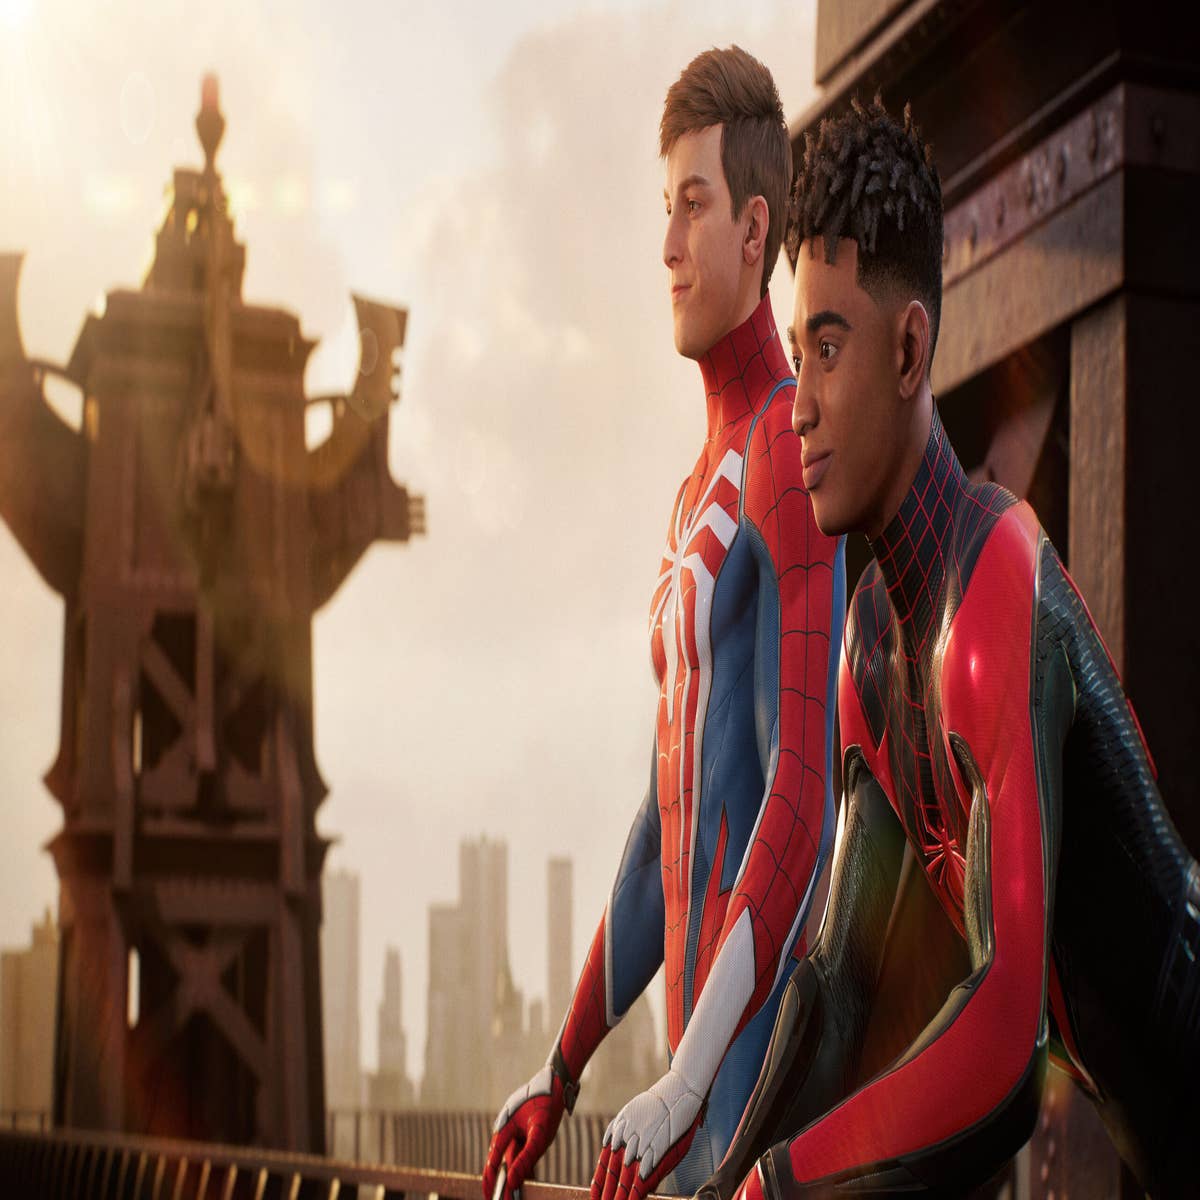 Spider-Man 2 mission list: All main and side missions